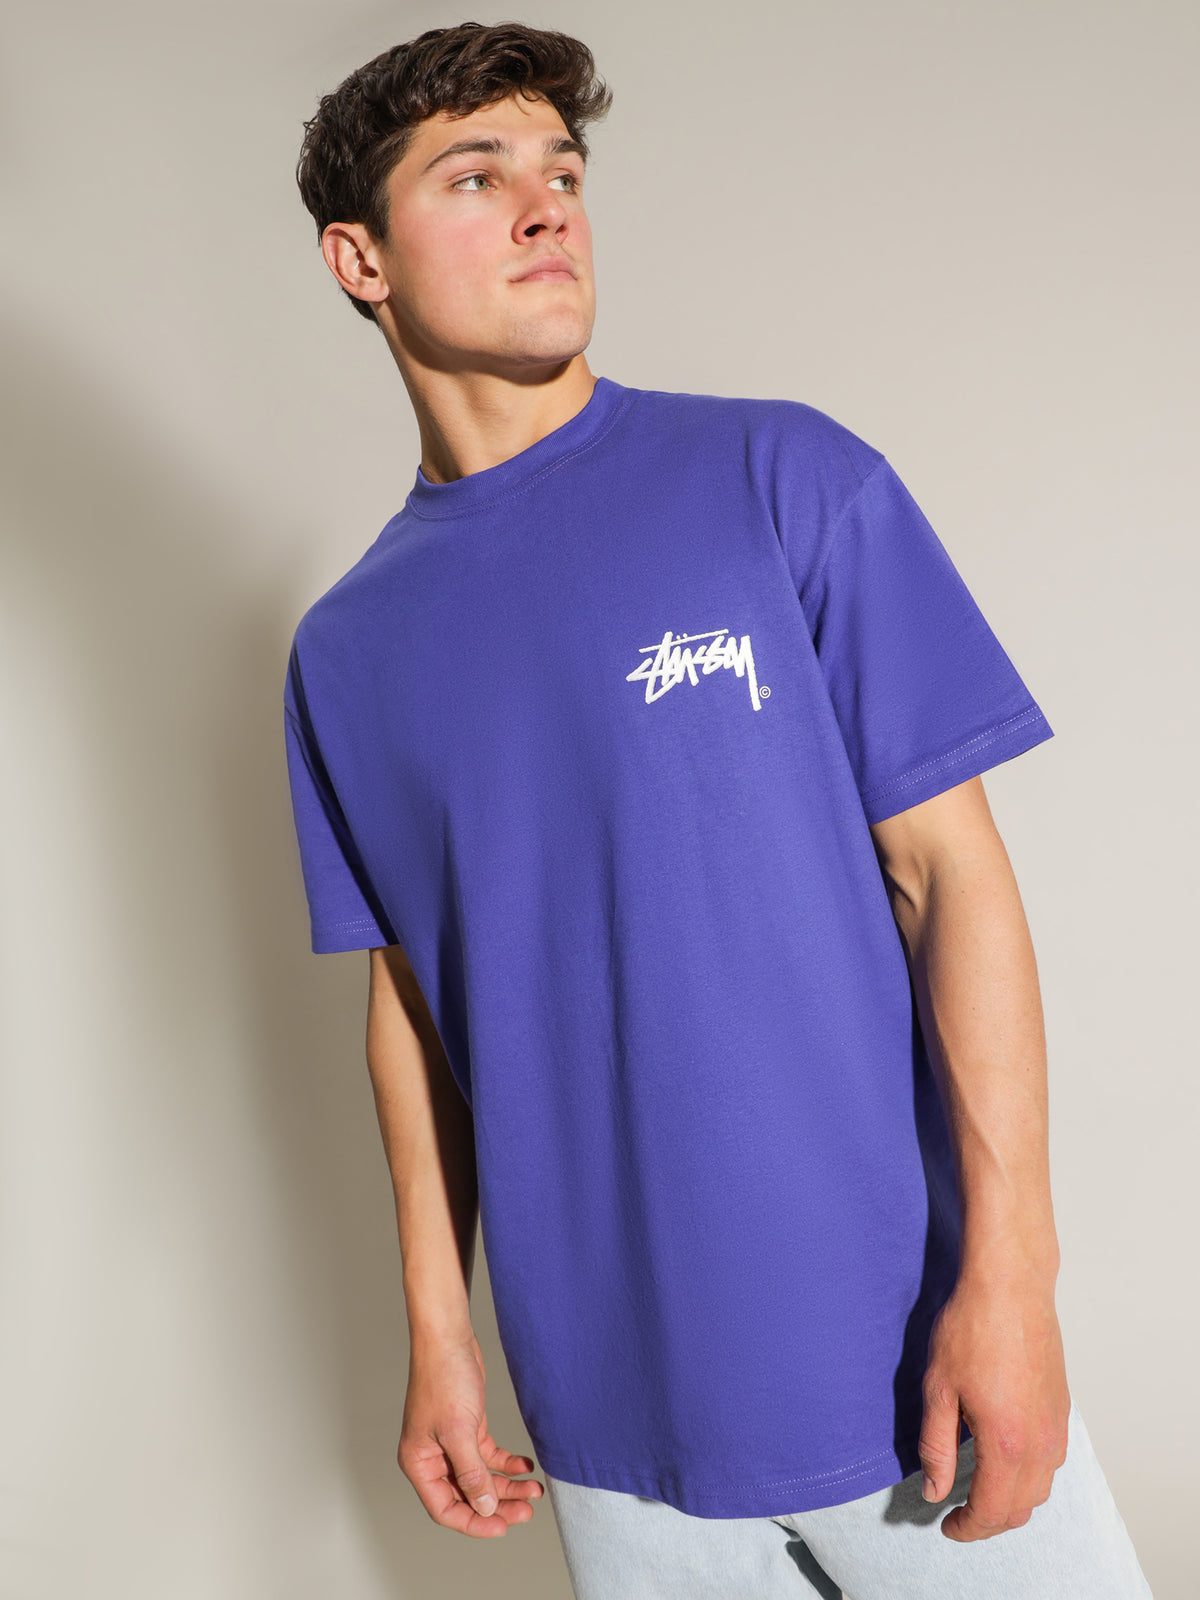 Sold Shadow Stock T-Shirt in Bright Blue